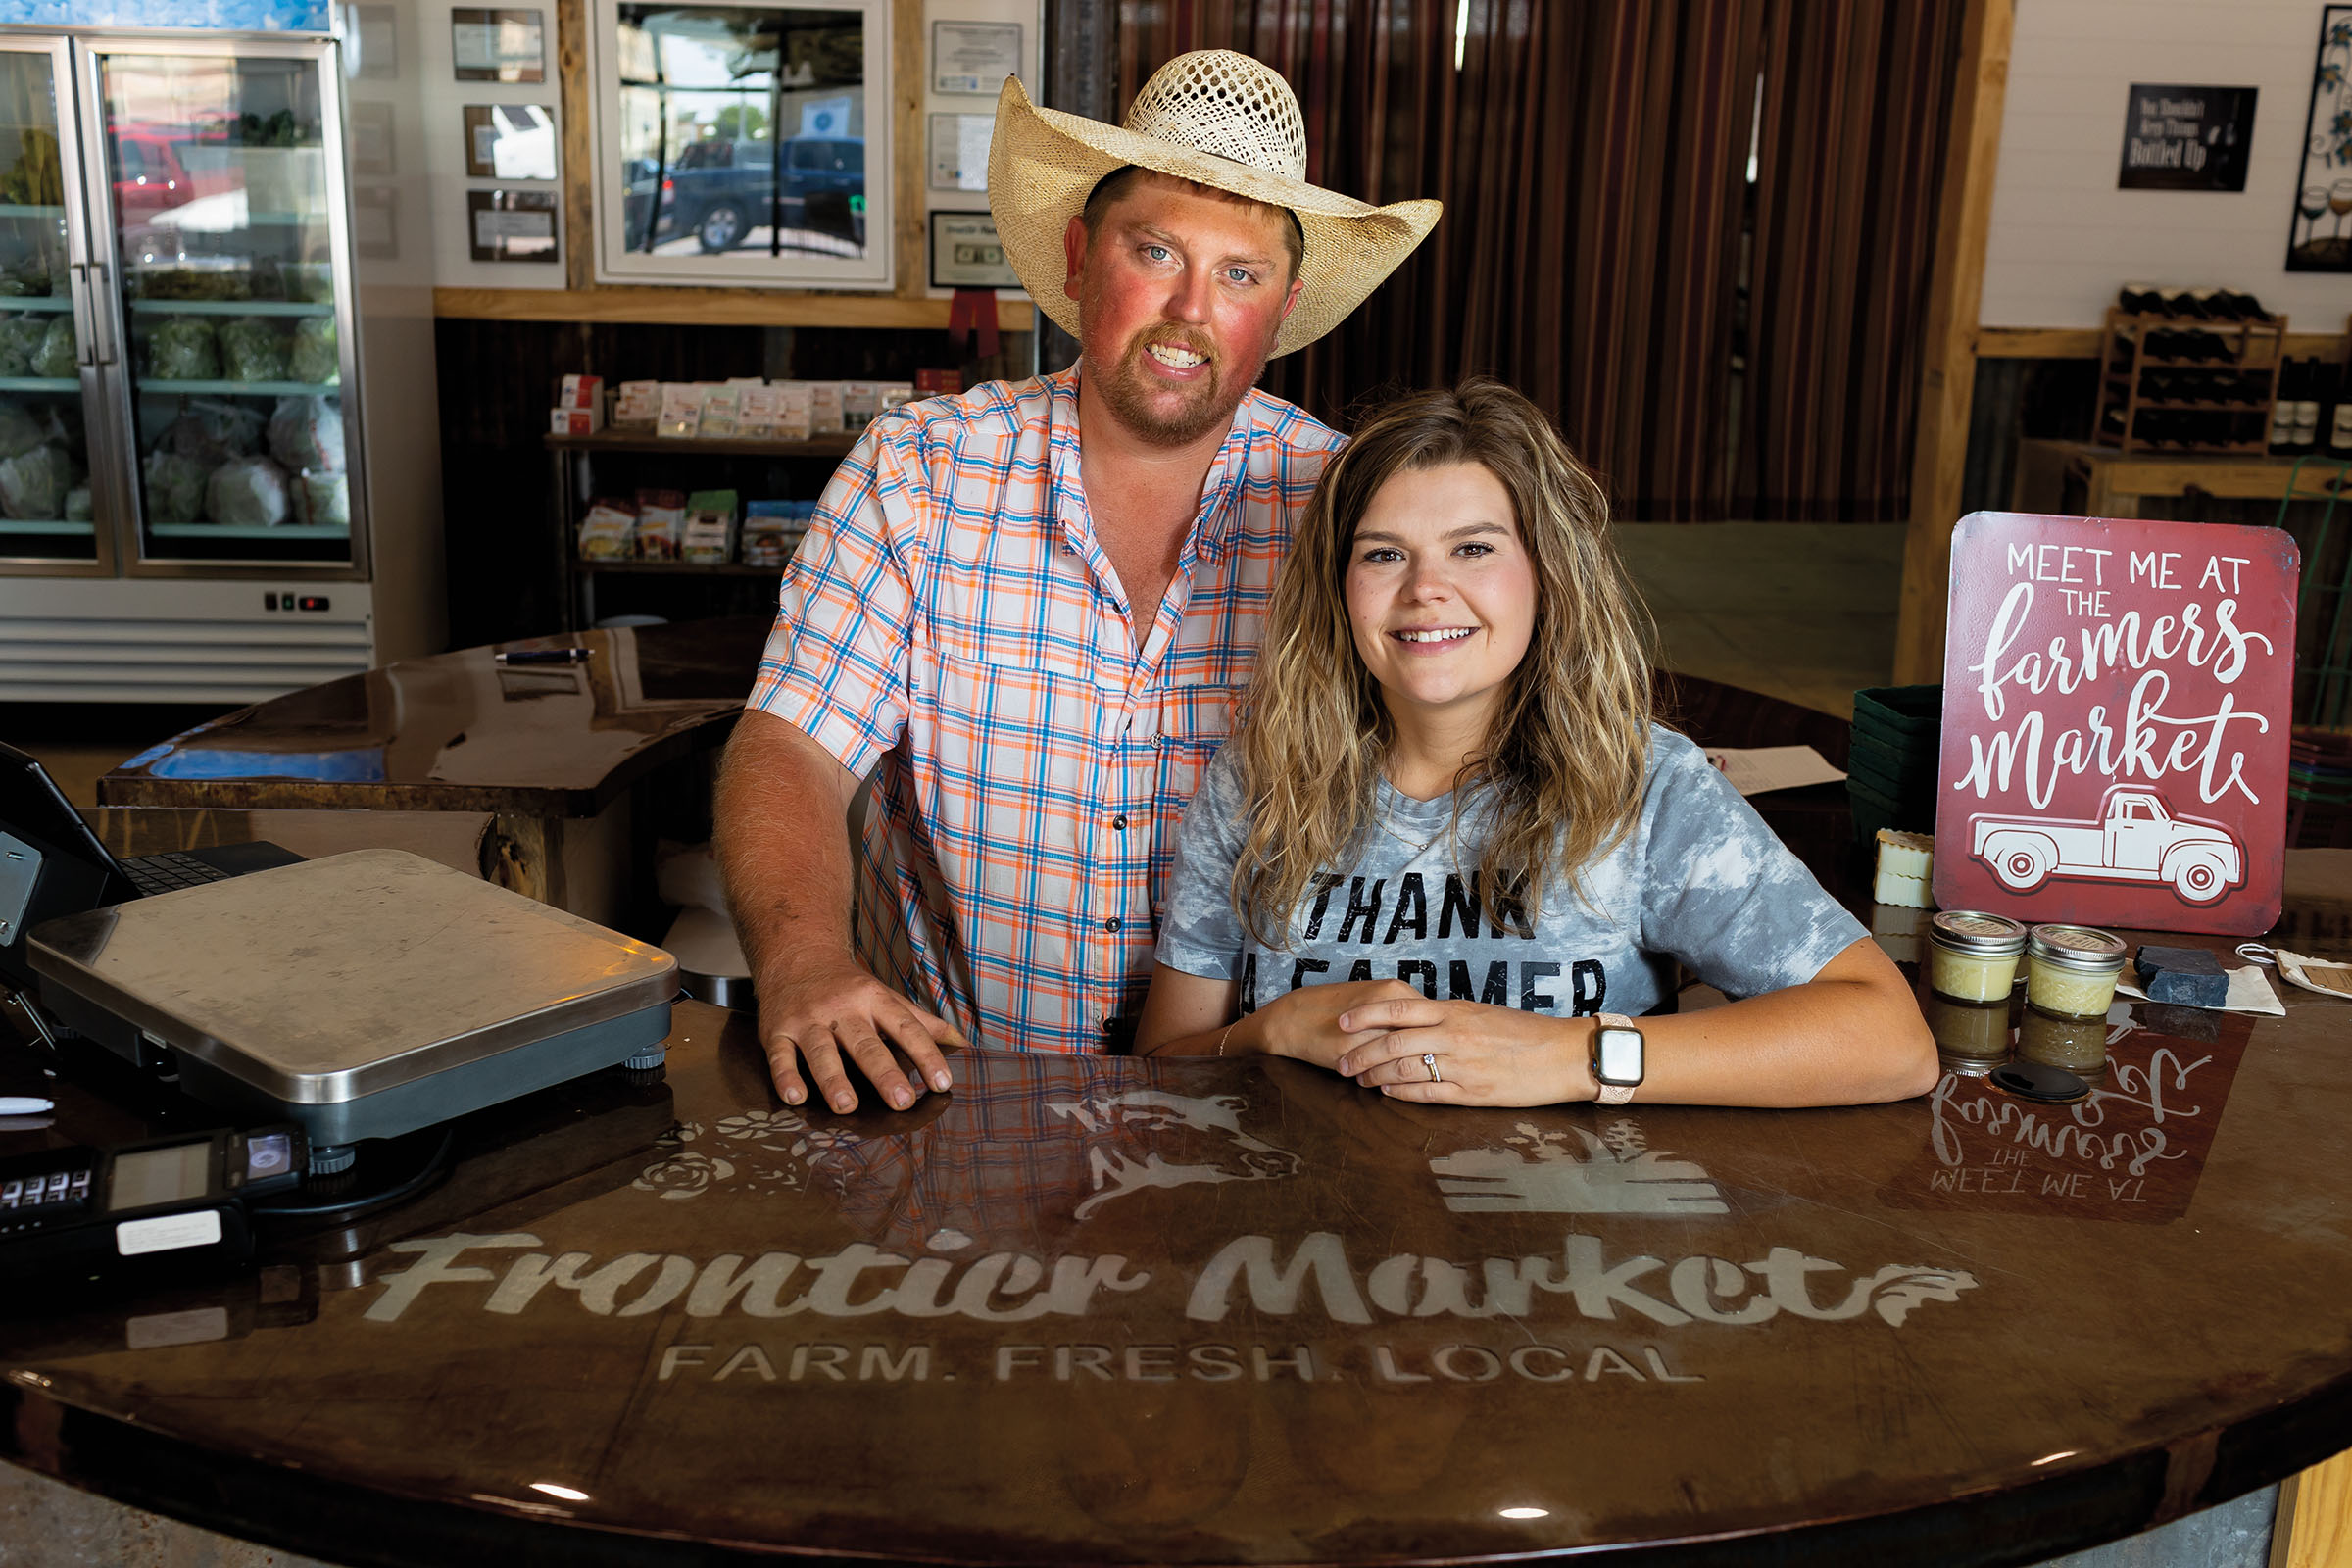 Two people, one wearing a cowboy hat, stand at a shiny countertop engraved with the words "Frontier Market. Farm. Fresh. Local."